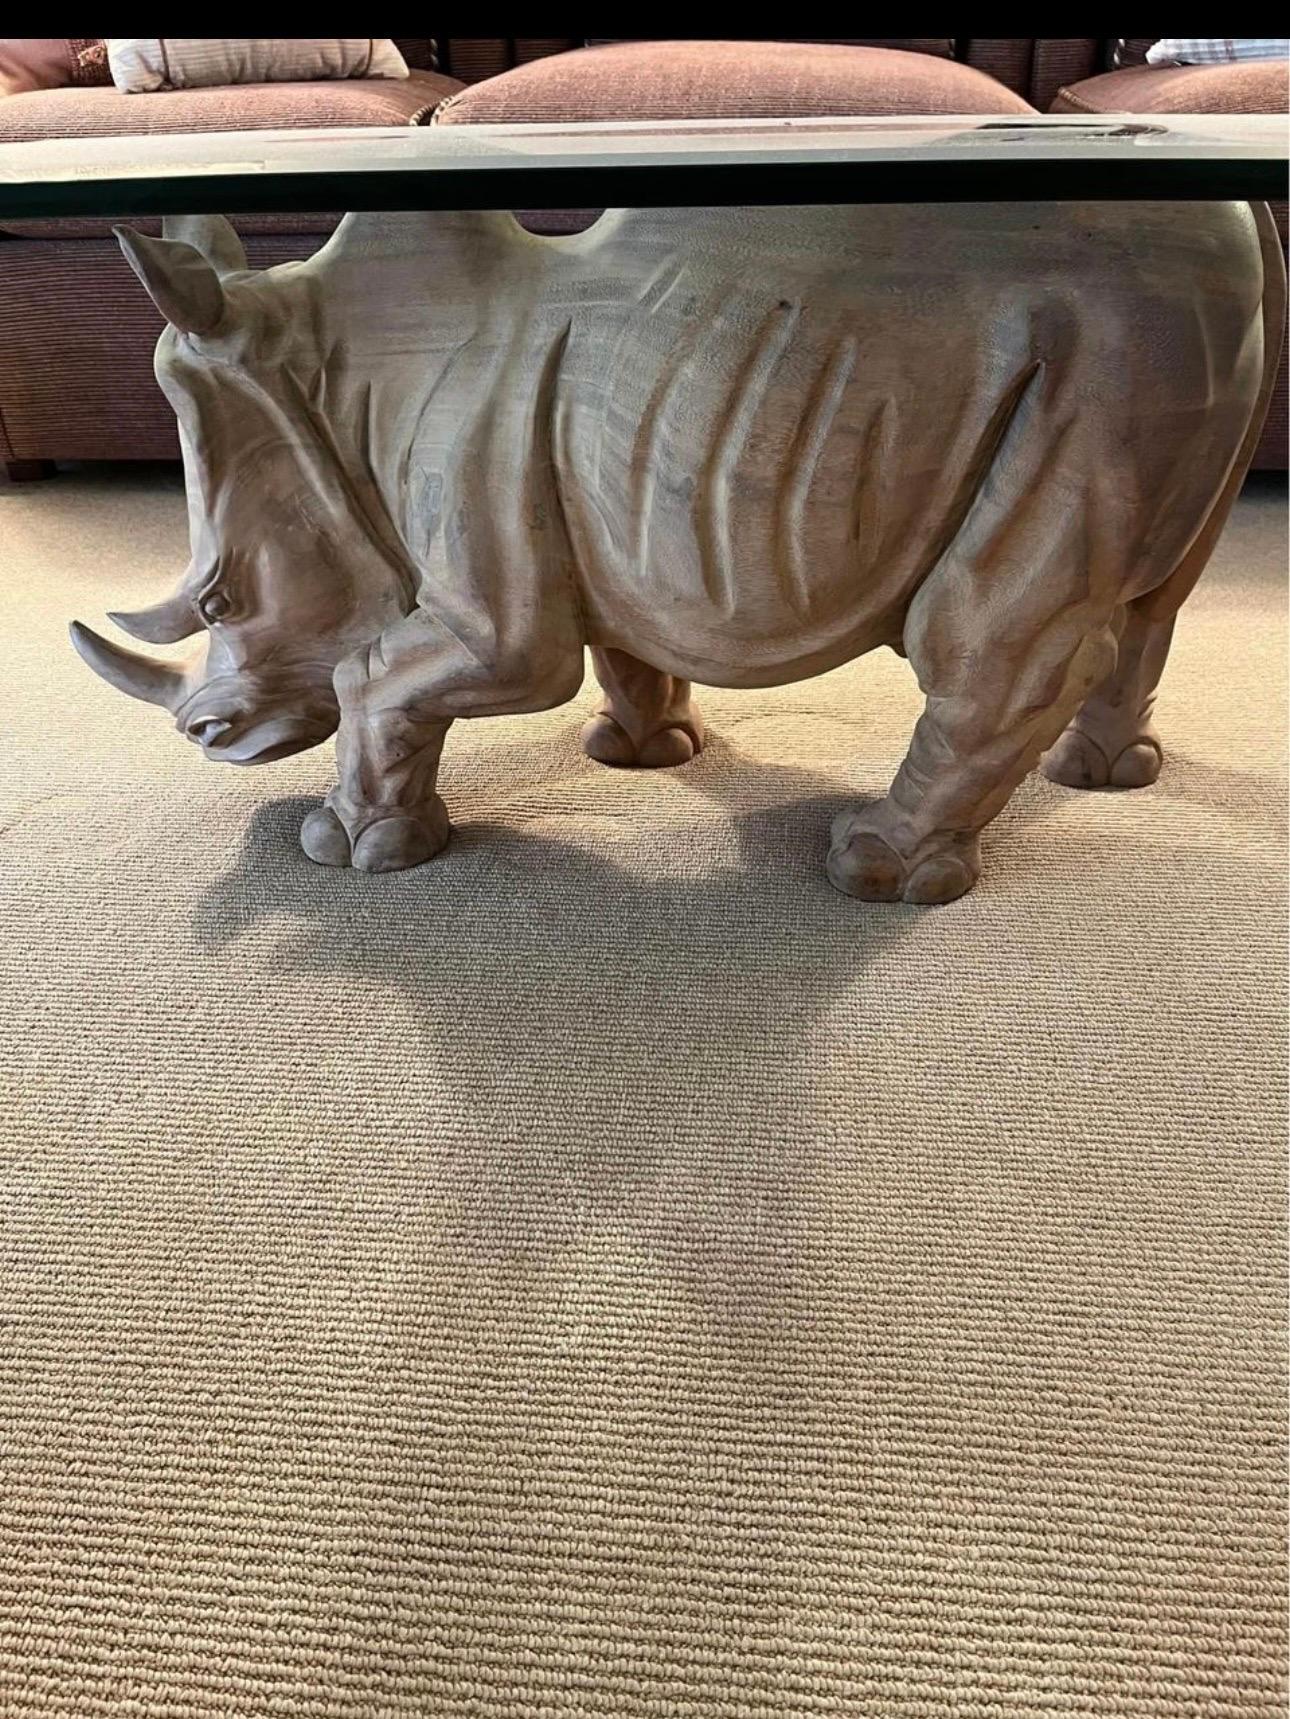 Wonderful vintage solid wood carved rhino rhinoceros coffee cocktail table. Original natural wood finish. May have natural fine cracks to wood. No damage or breaks. Glass shown does not come with table since its vintage and has scratches. It is